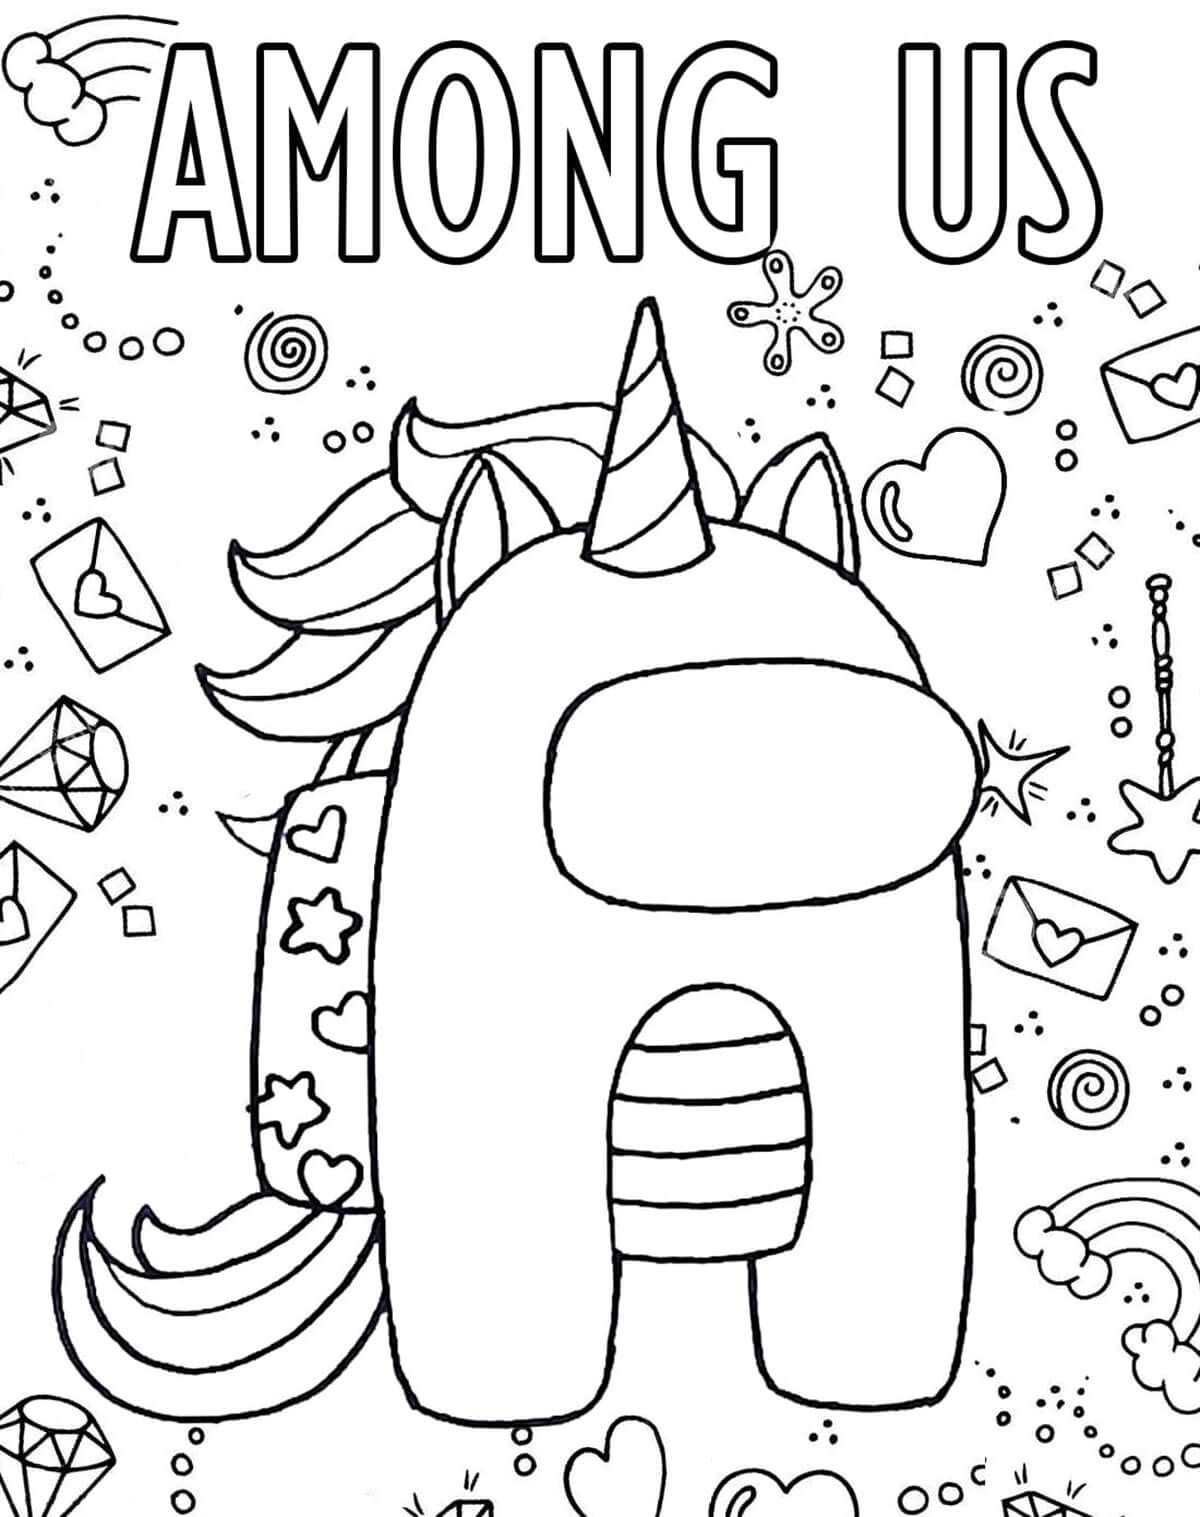 Download Among Us Coloring Pages Free Printable Coloring Pages For Kids